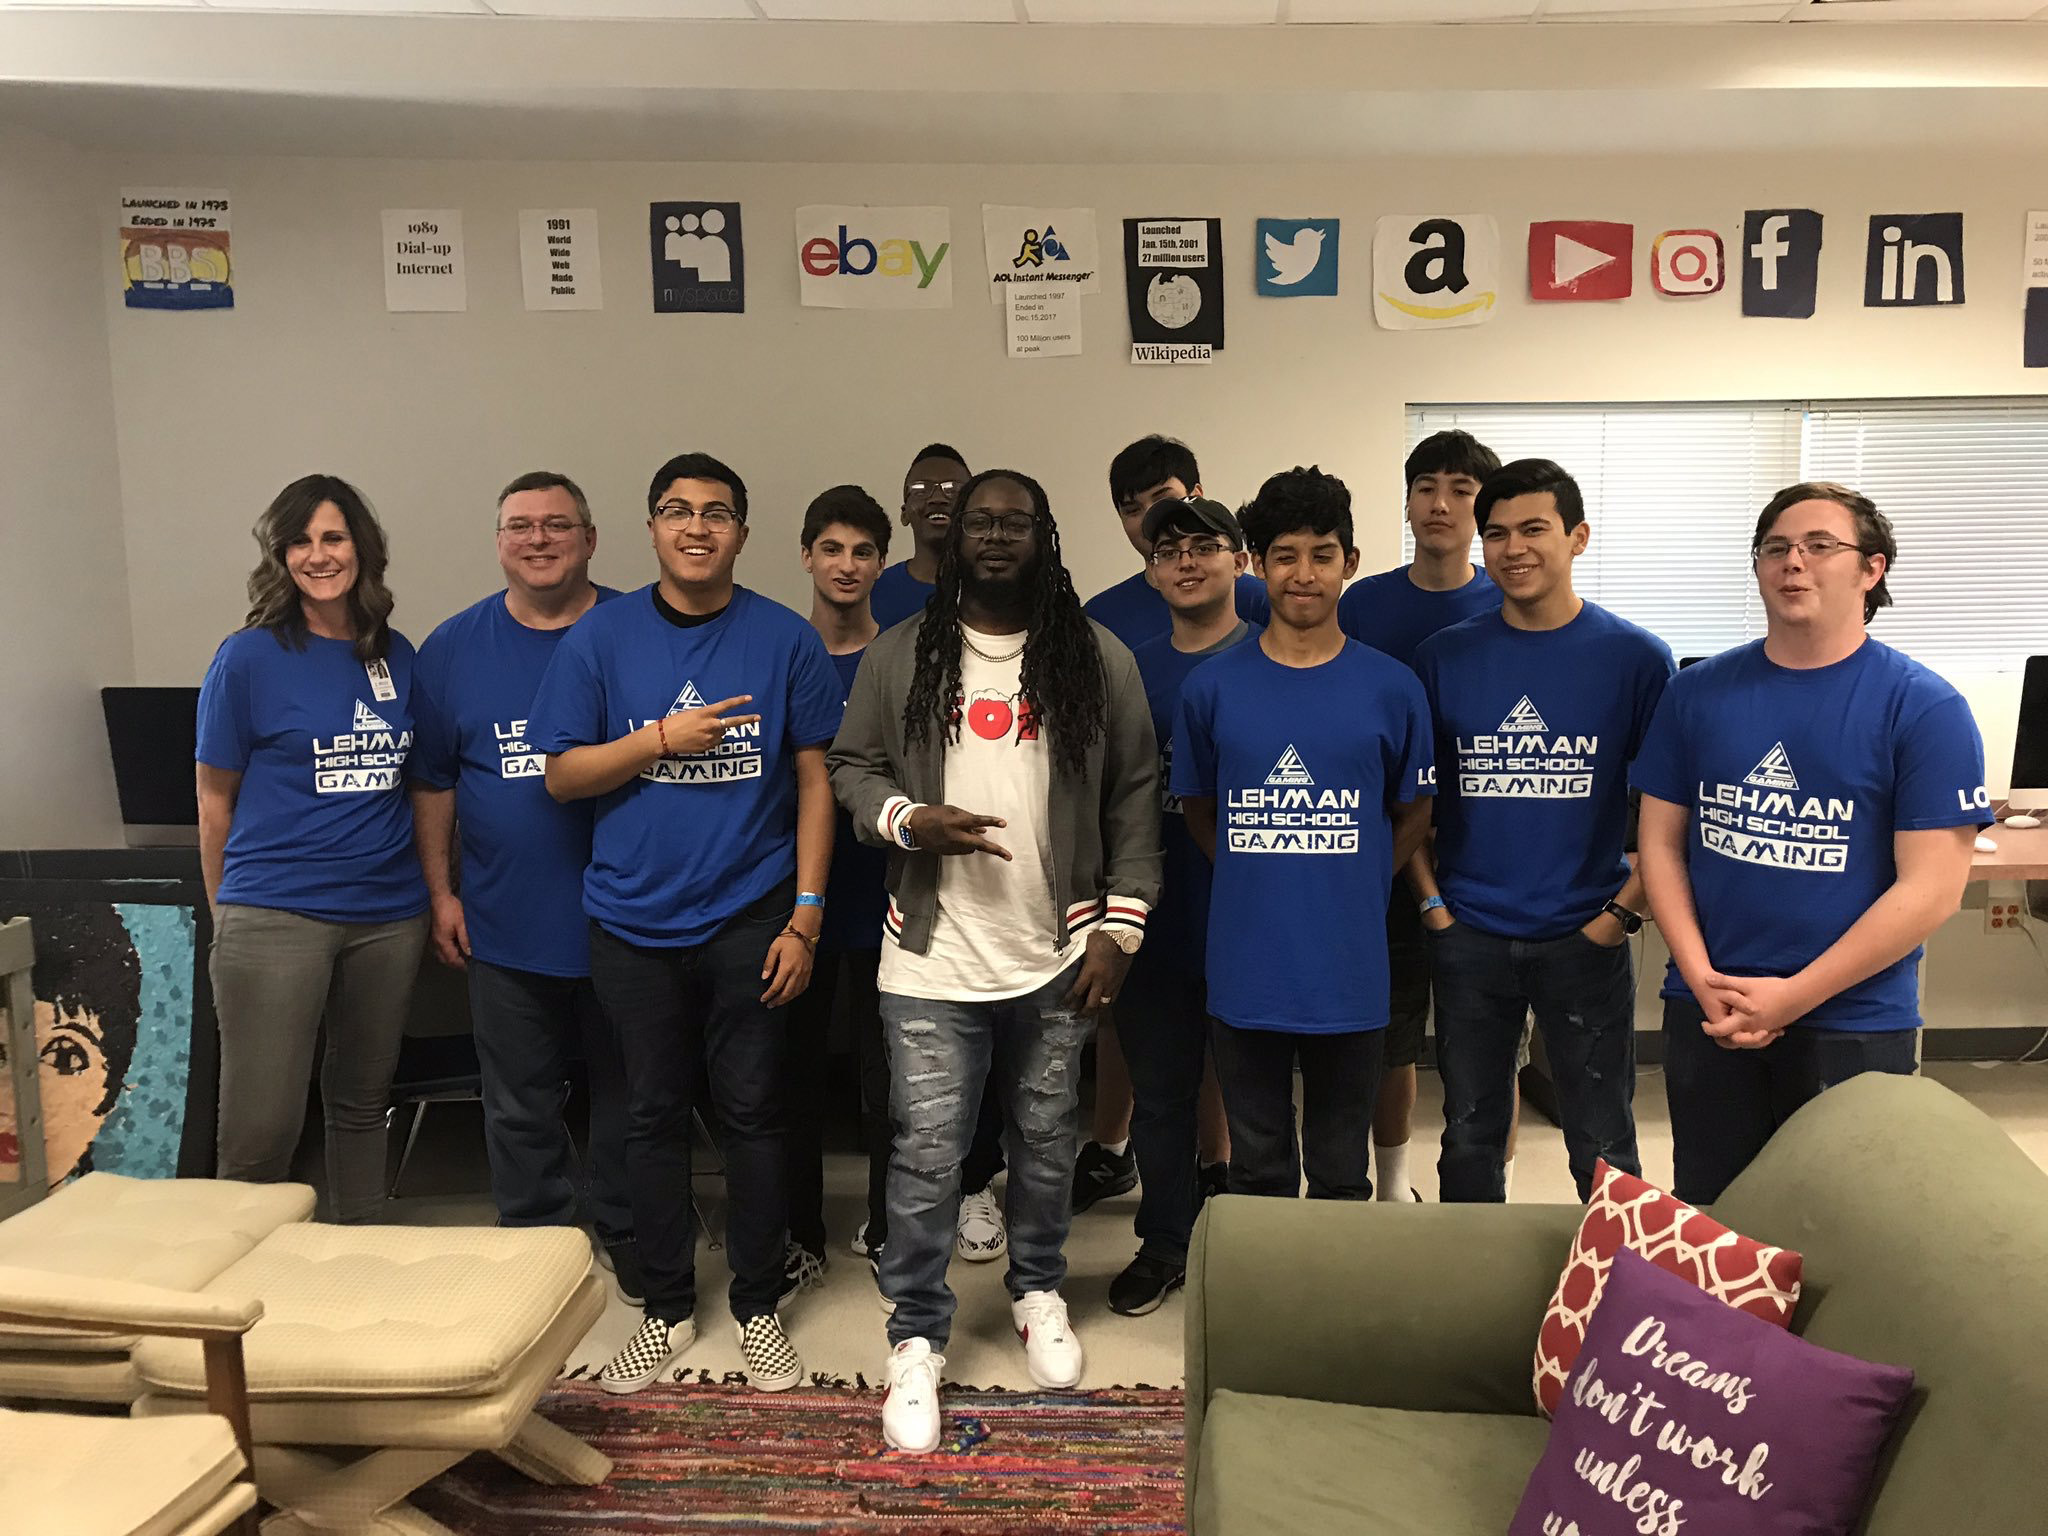 males students and male and female teachers from the lehman high school gaming club pose for a photo in a room with hand drawn tech company logos posted on the wall behind them